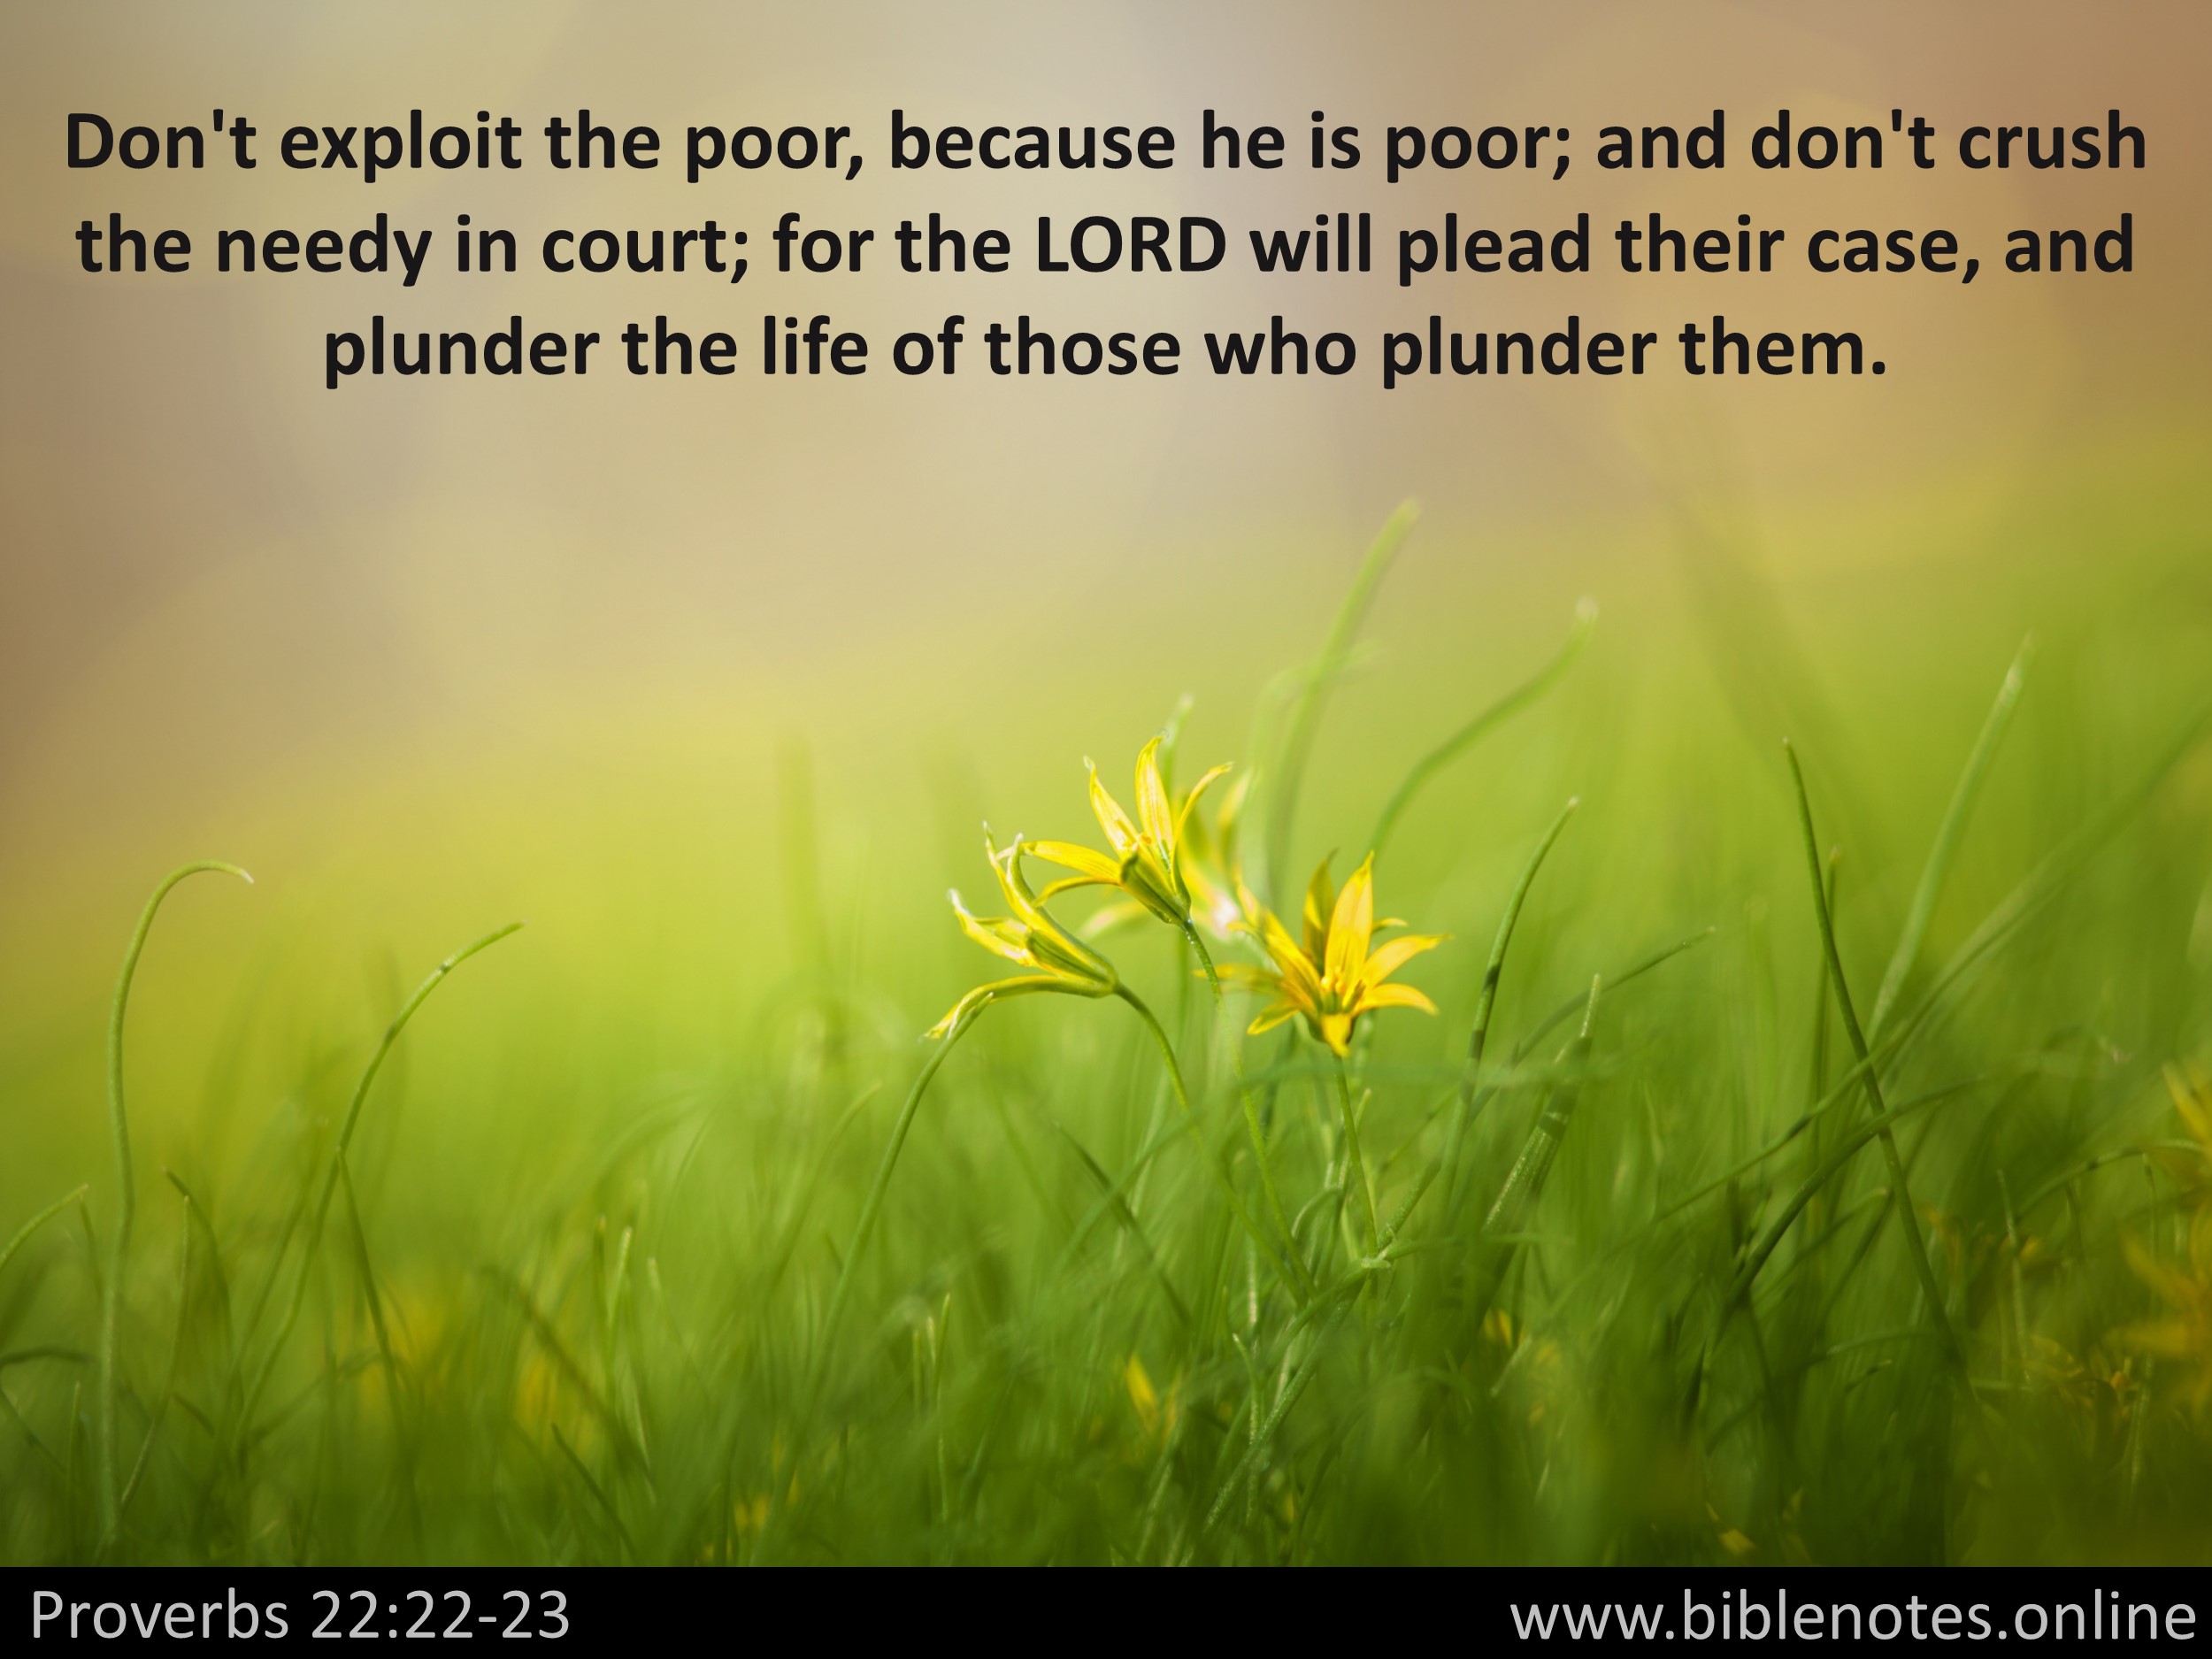 Bible Verse from Proverbs Chapter 22